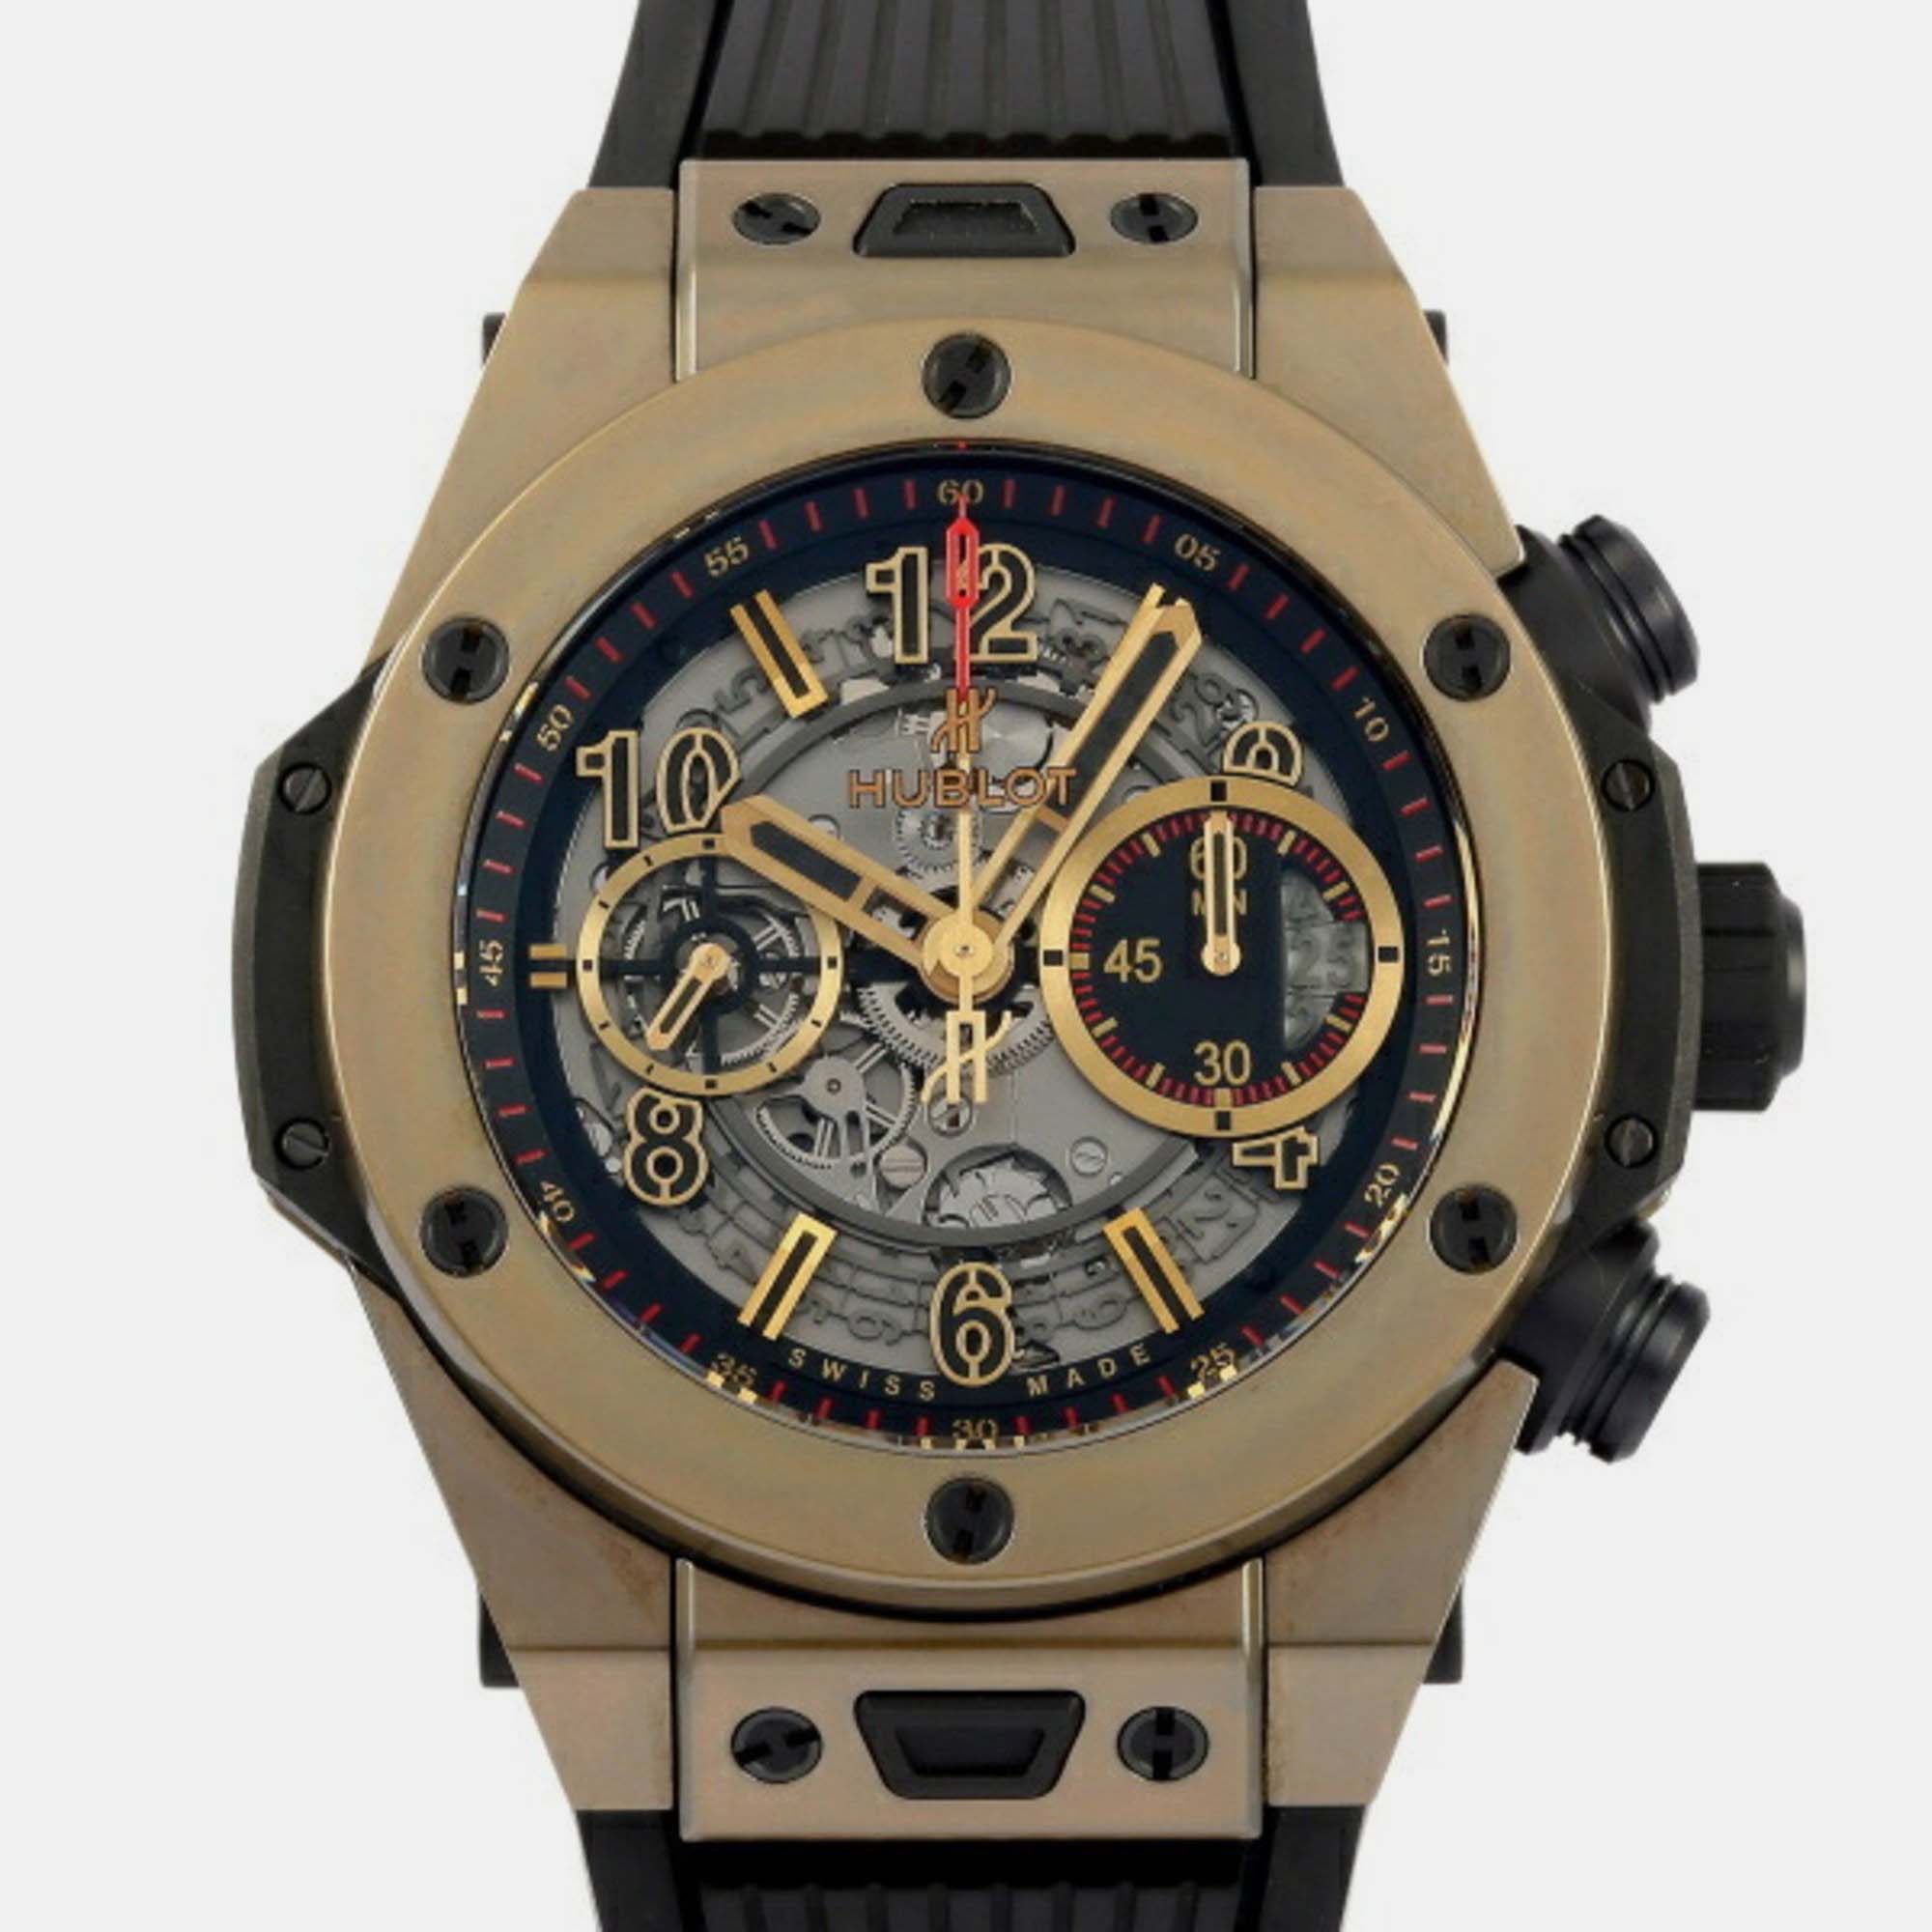 Let this authentic Hublot timepiece help you make every moment count Created with skill using high grade materials this watch is a functional accessory designed to impart a luxurious style while keeping you on time.